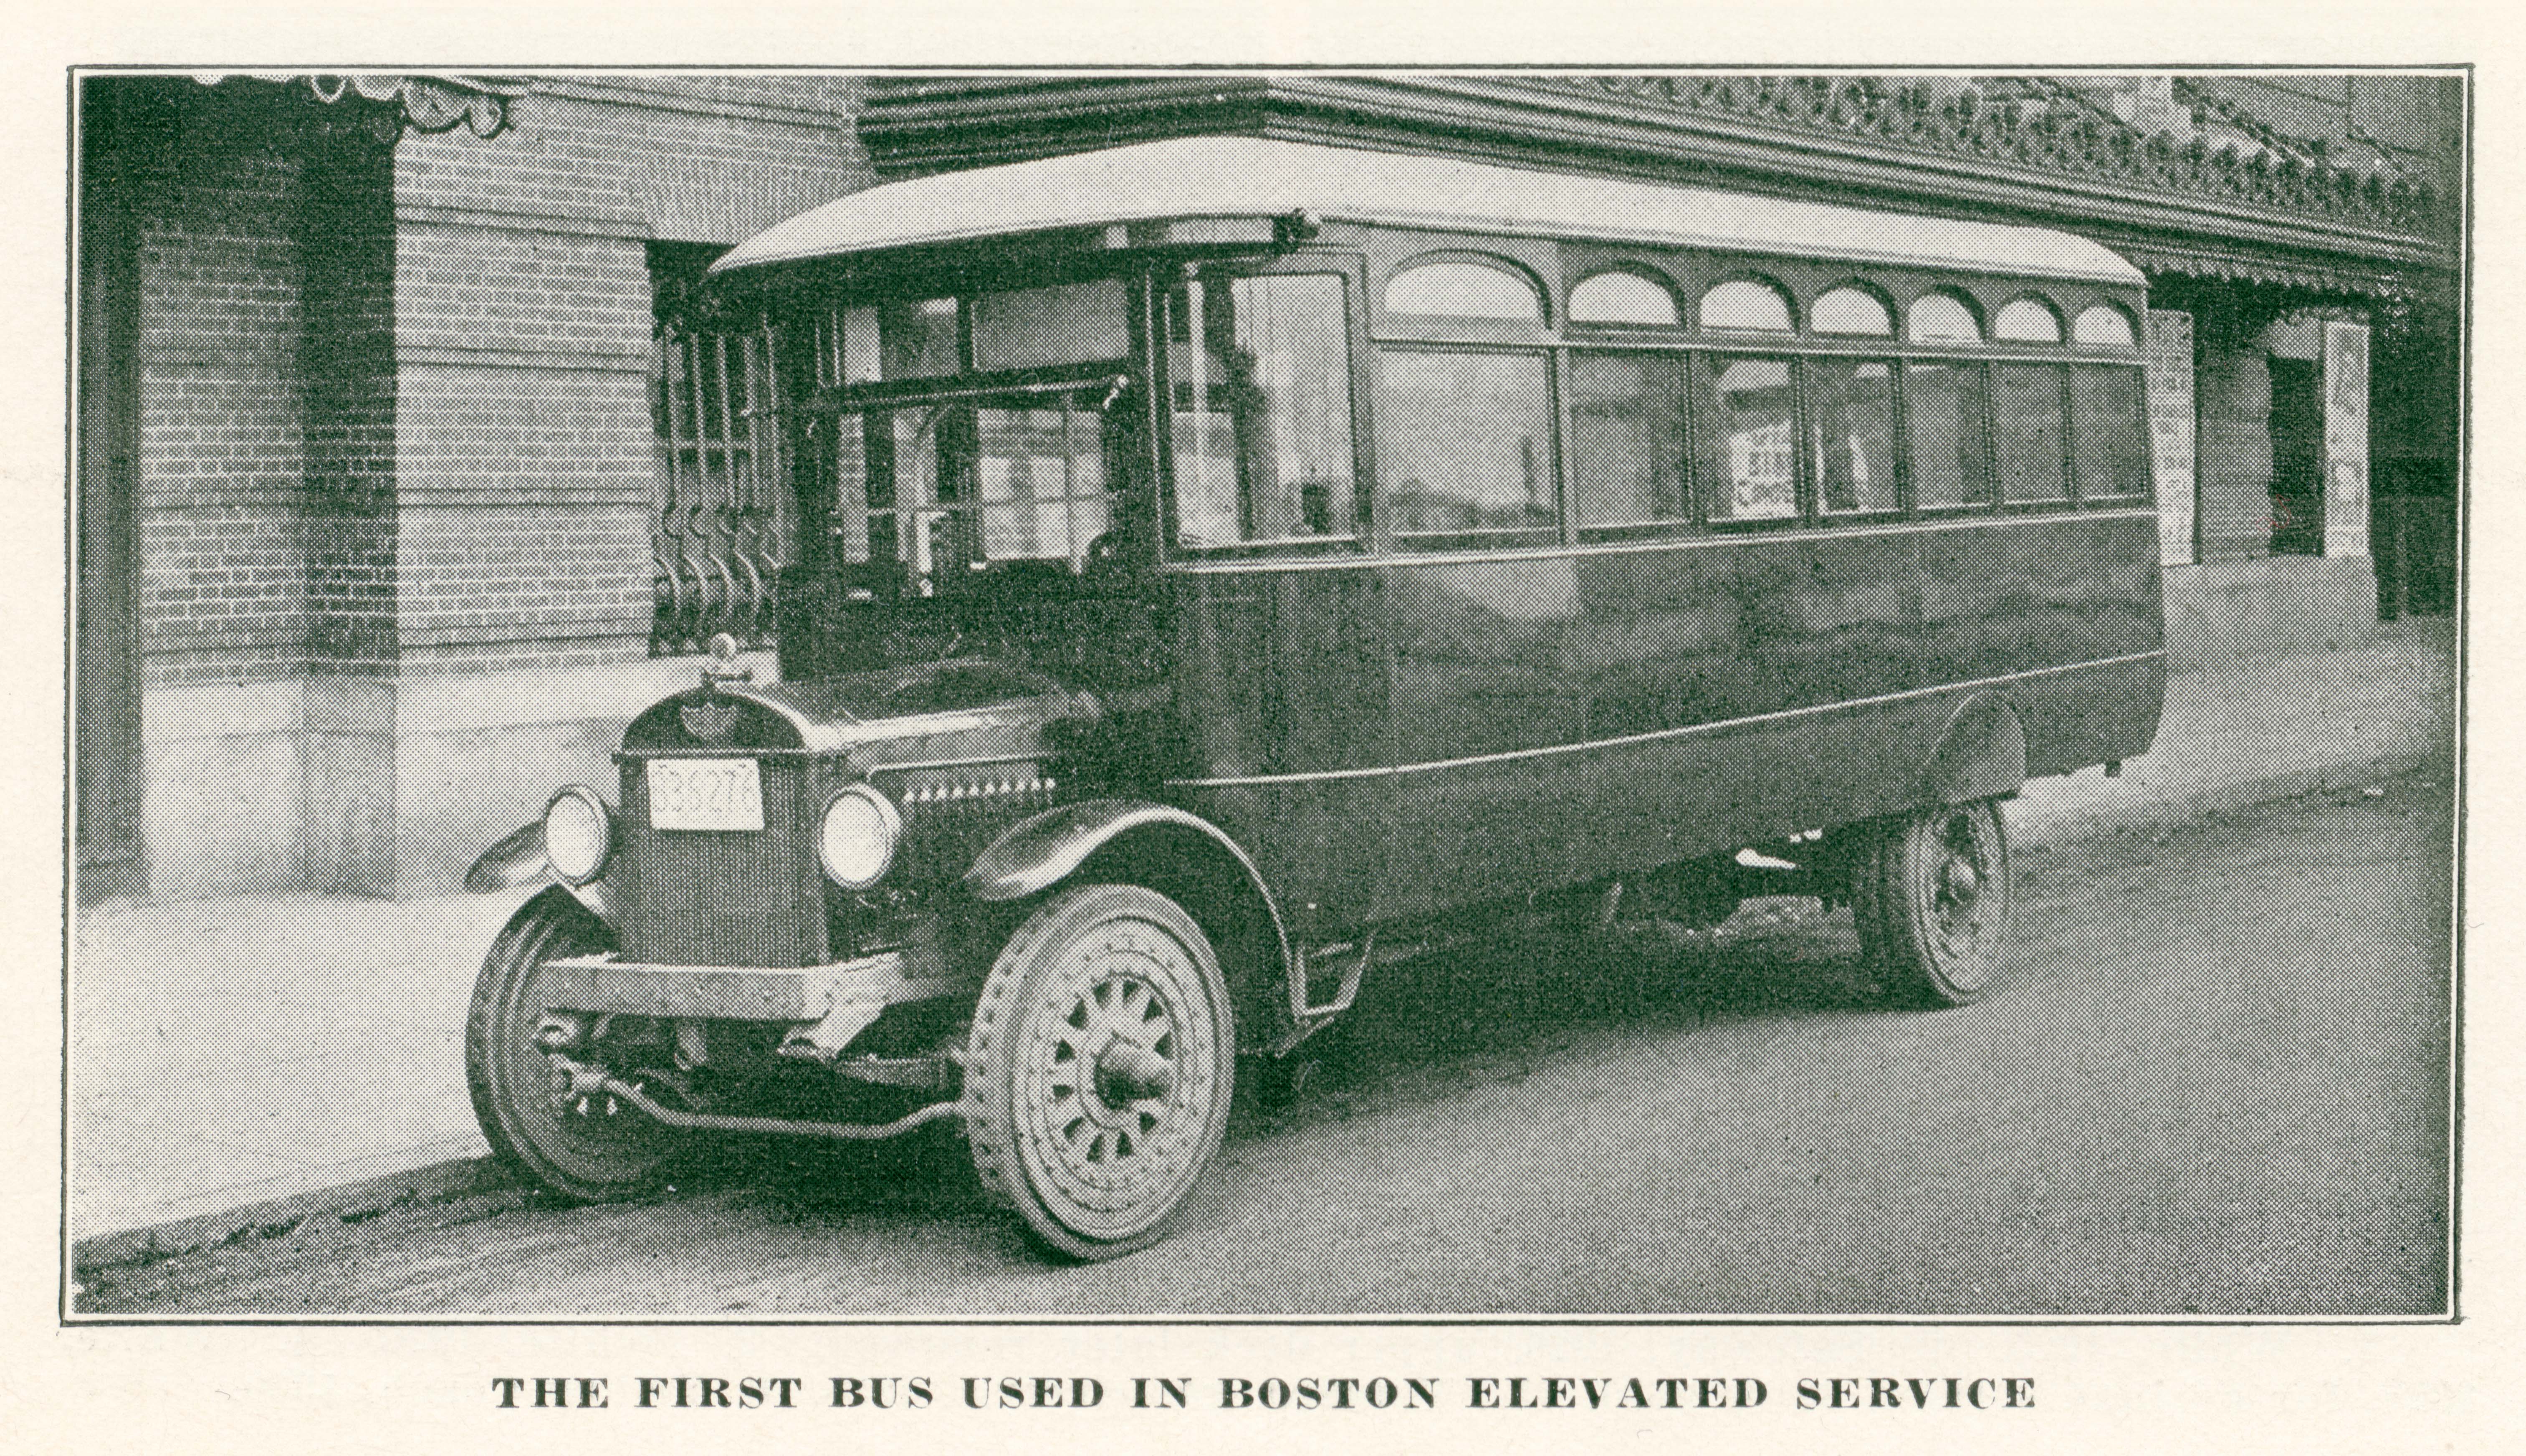 Image of “The First Bus in Boston Elevated Service” from “Co-operation,” v. 12 no. 2